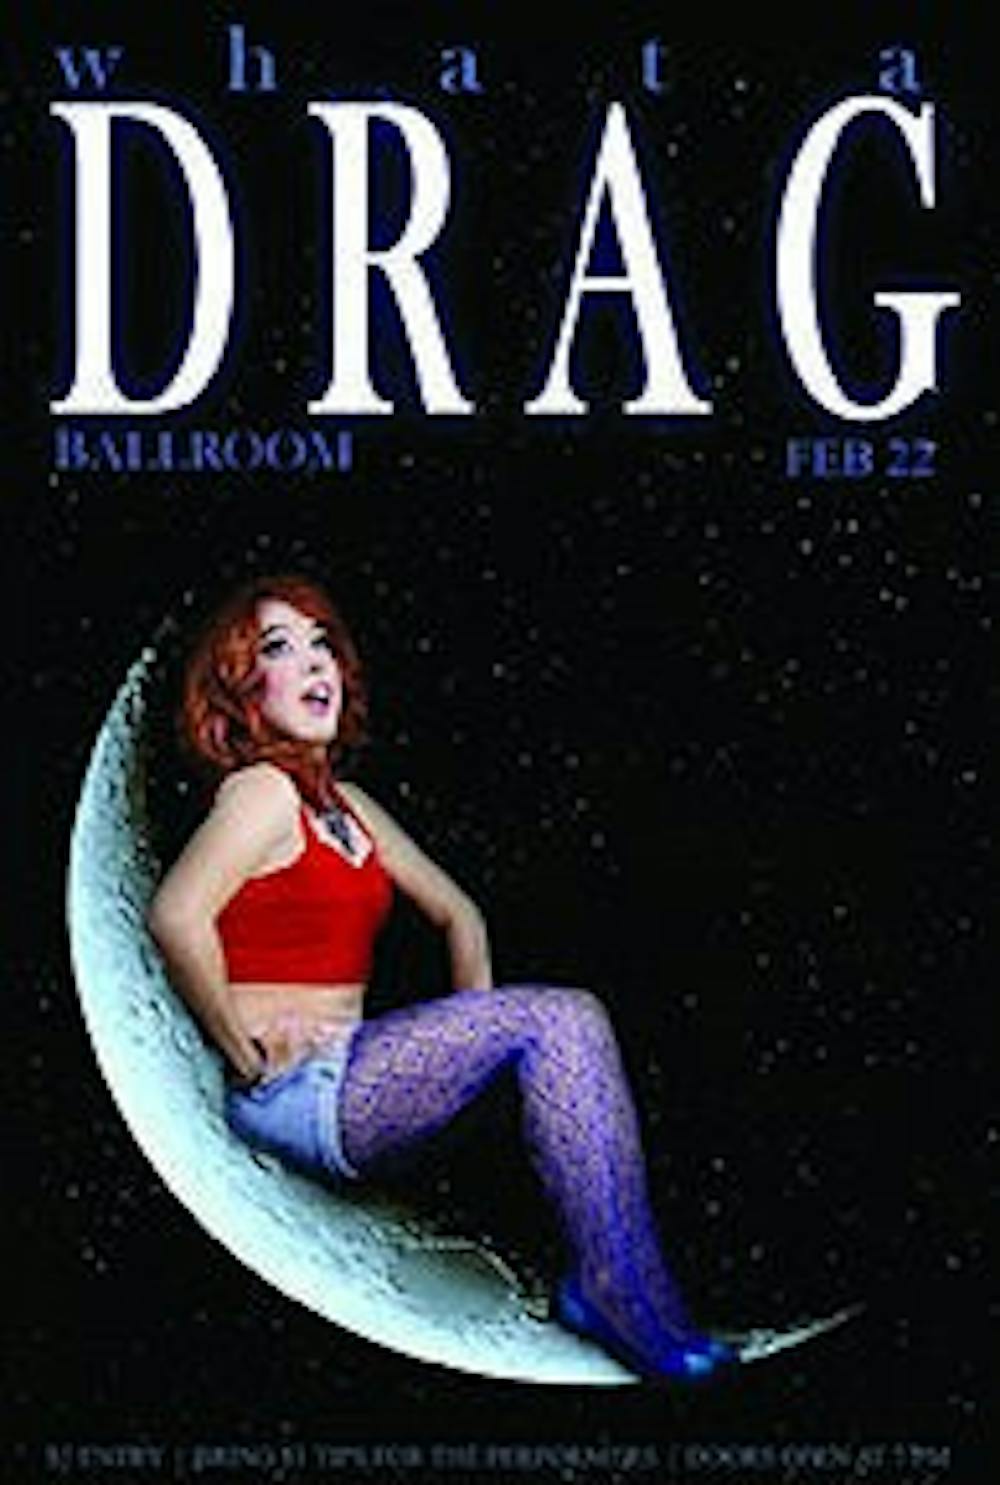 Performers such as Femma Nazi, pictured above, will be featured in Spectrum's What-a-Drag! show on Saturday, Feb. 22 (Contributed by Ellen Dowdell)